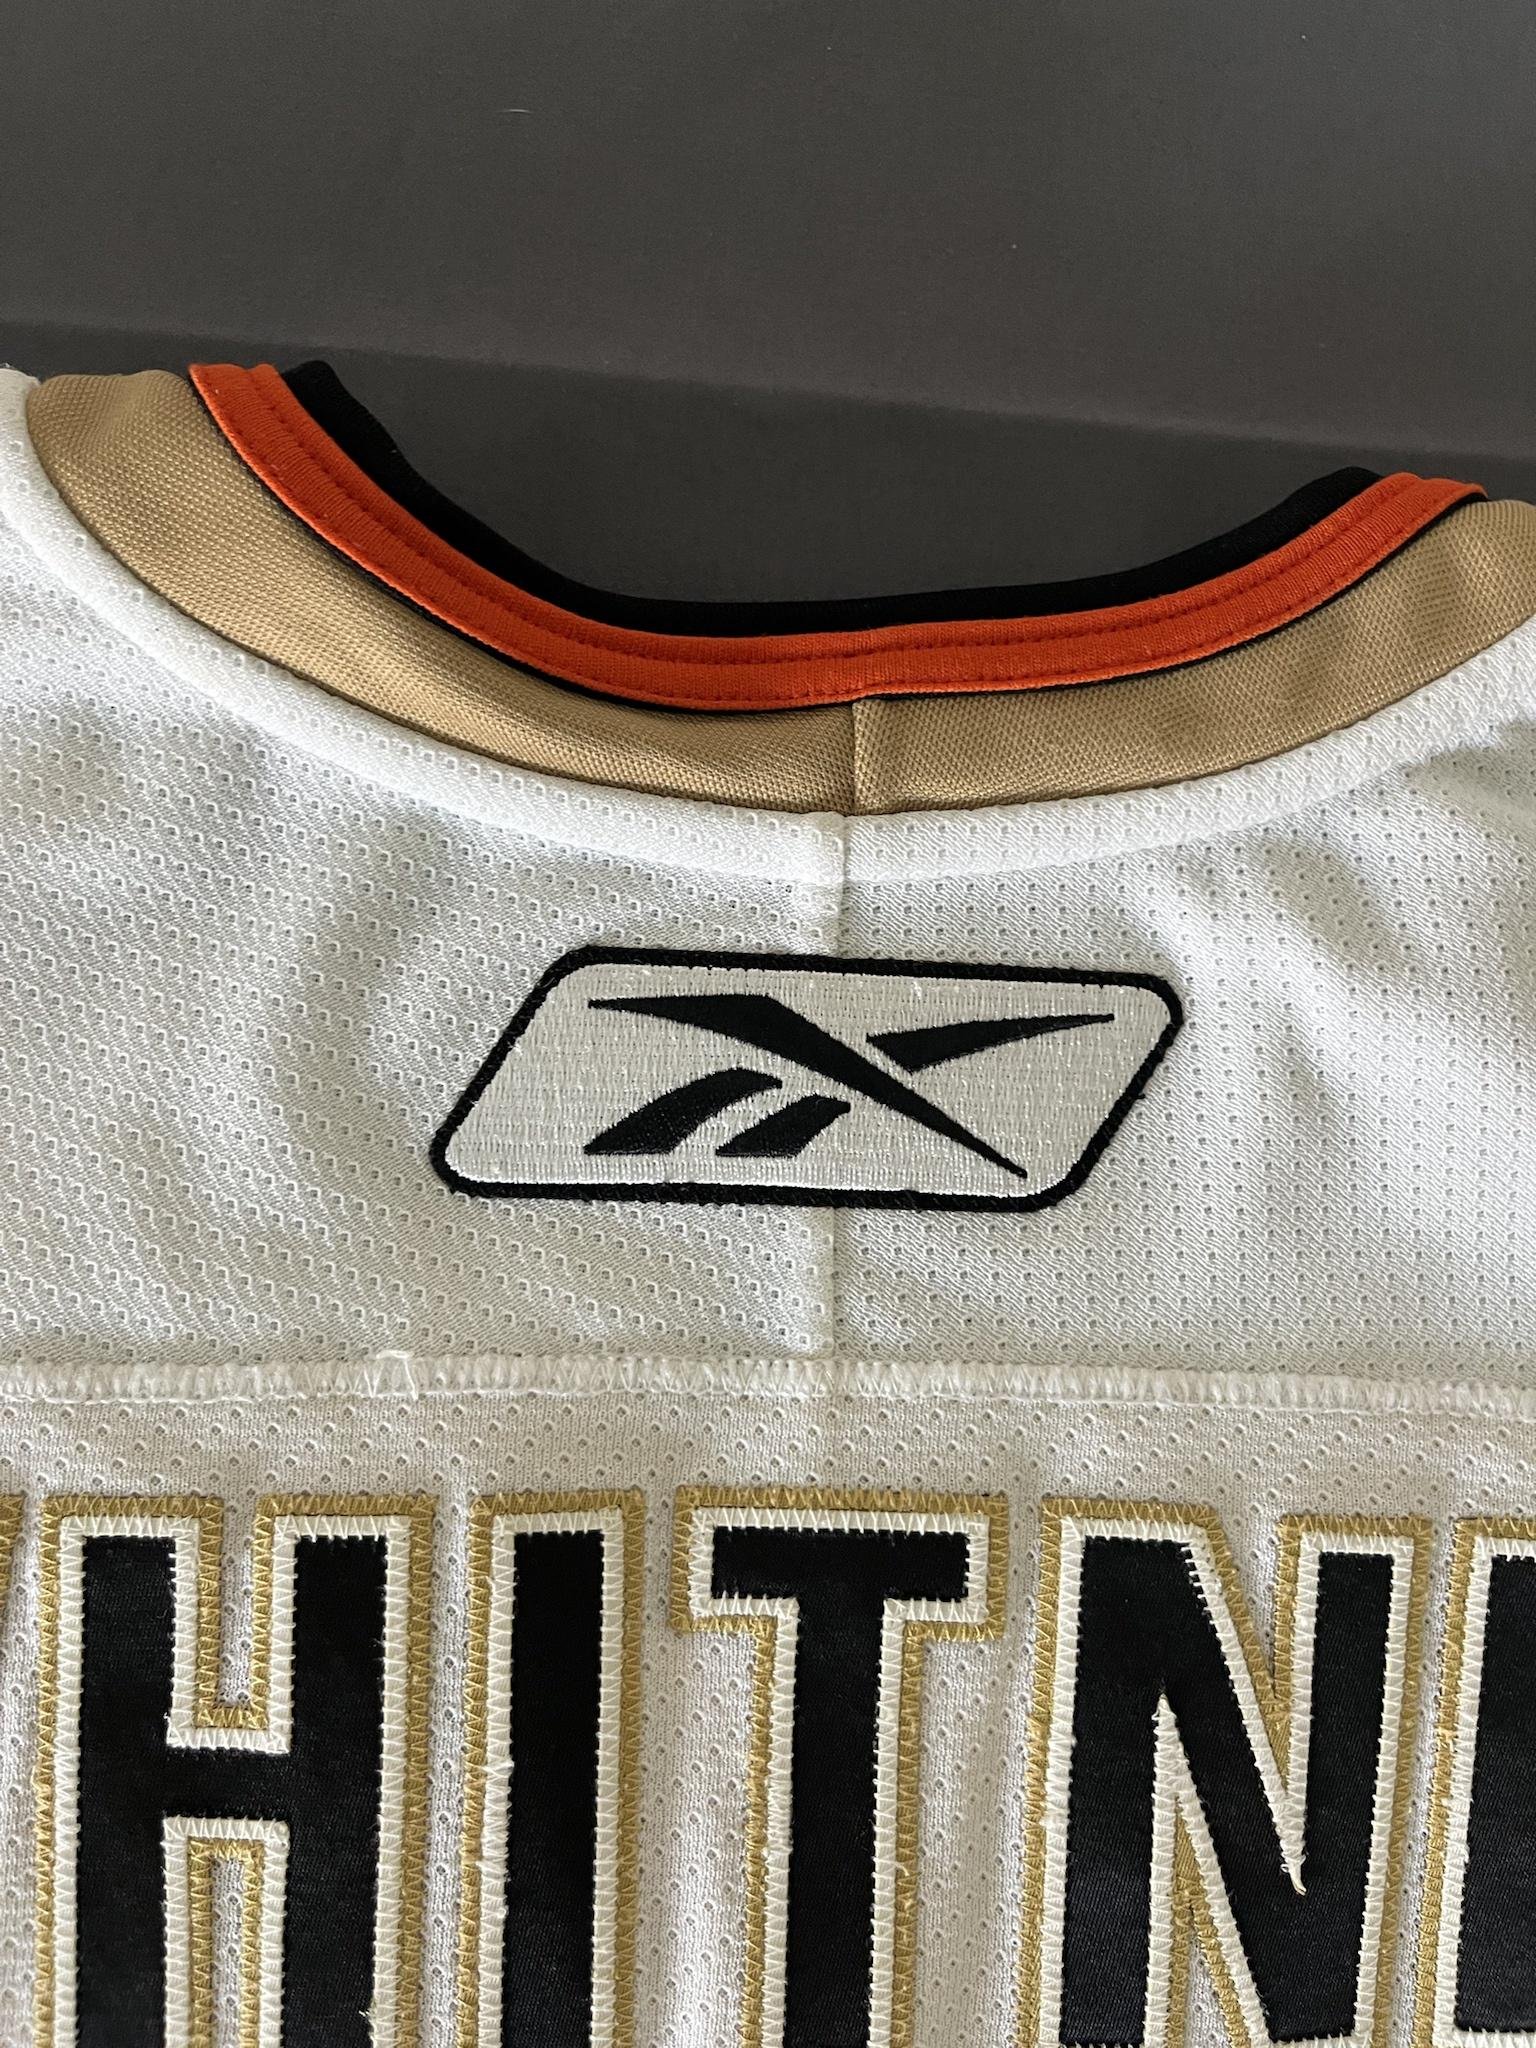 2009-10 Ryan Whitney Game Worn Jersey! His first jersey with the Oilers. :  r/hockeyjerseys